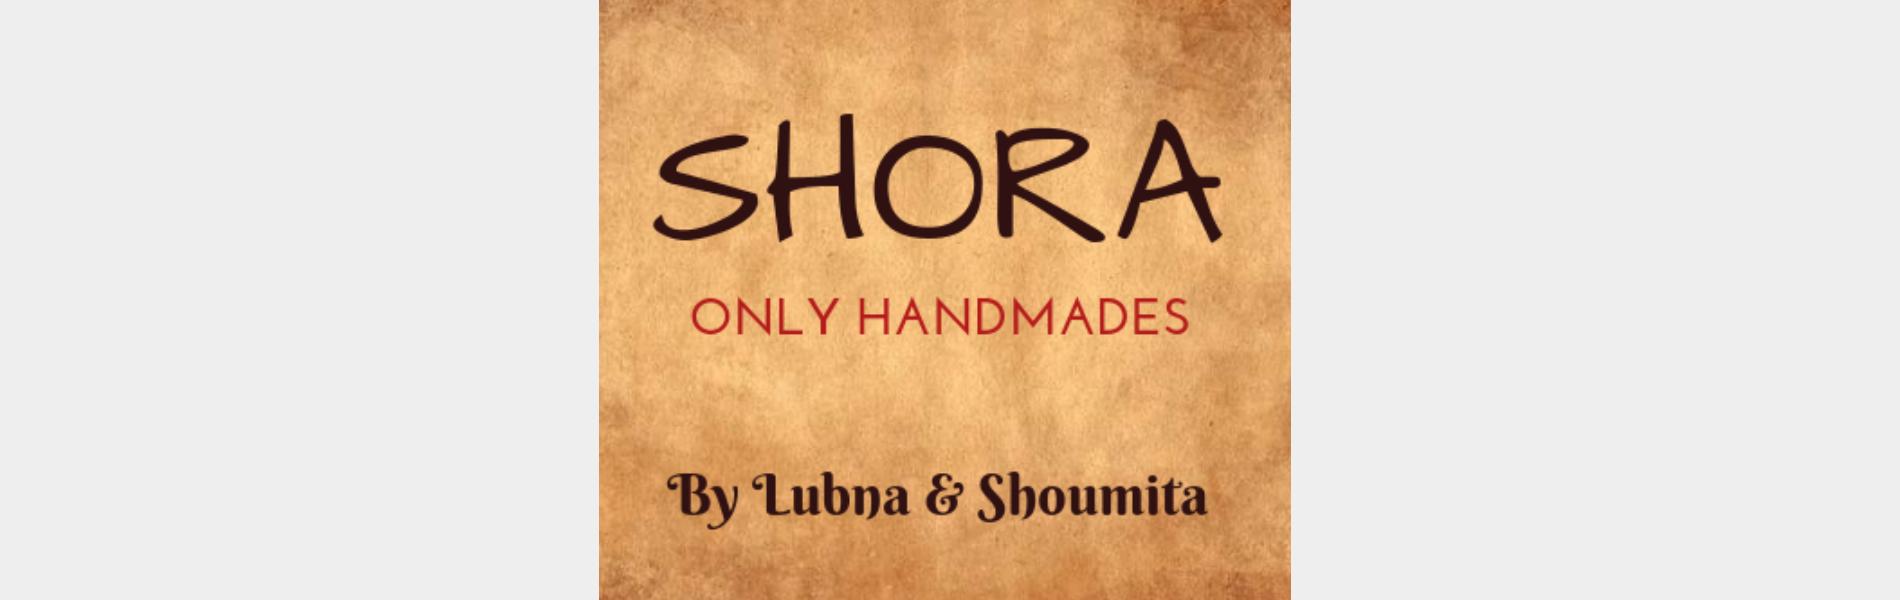 Shora - Only handmades 